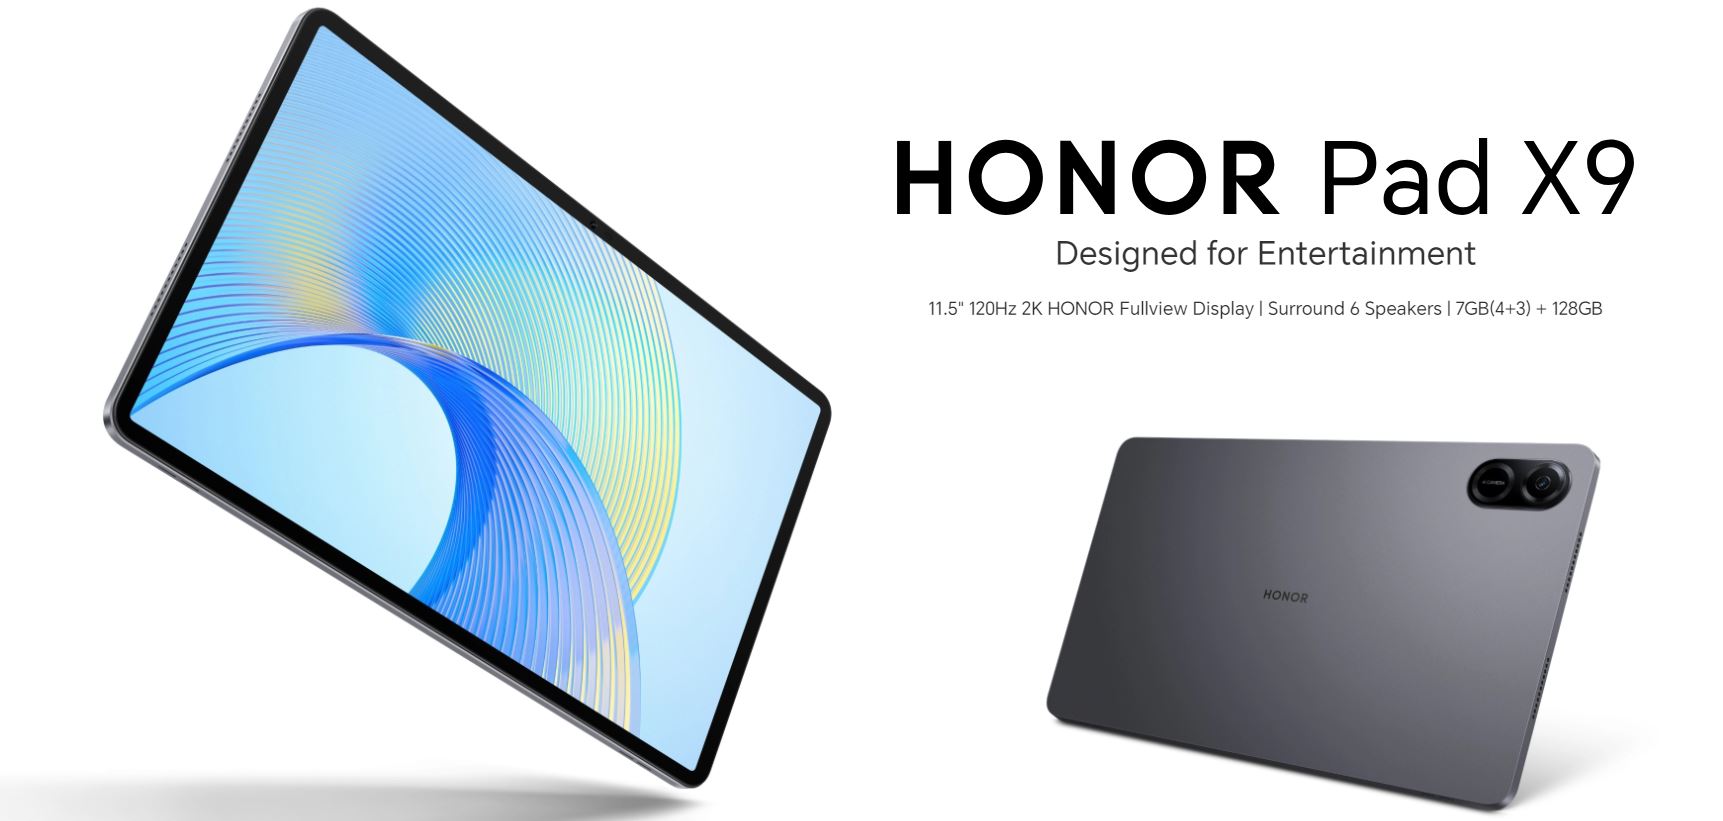 HONOR Pad X9, 11.5-inch Wi-Fi Tablet, 4GB+128GB, 120Hz 2K Fullview Display,  6 Speakers, Android 13, Space Grey